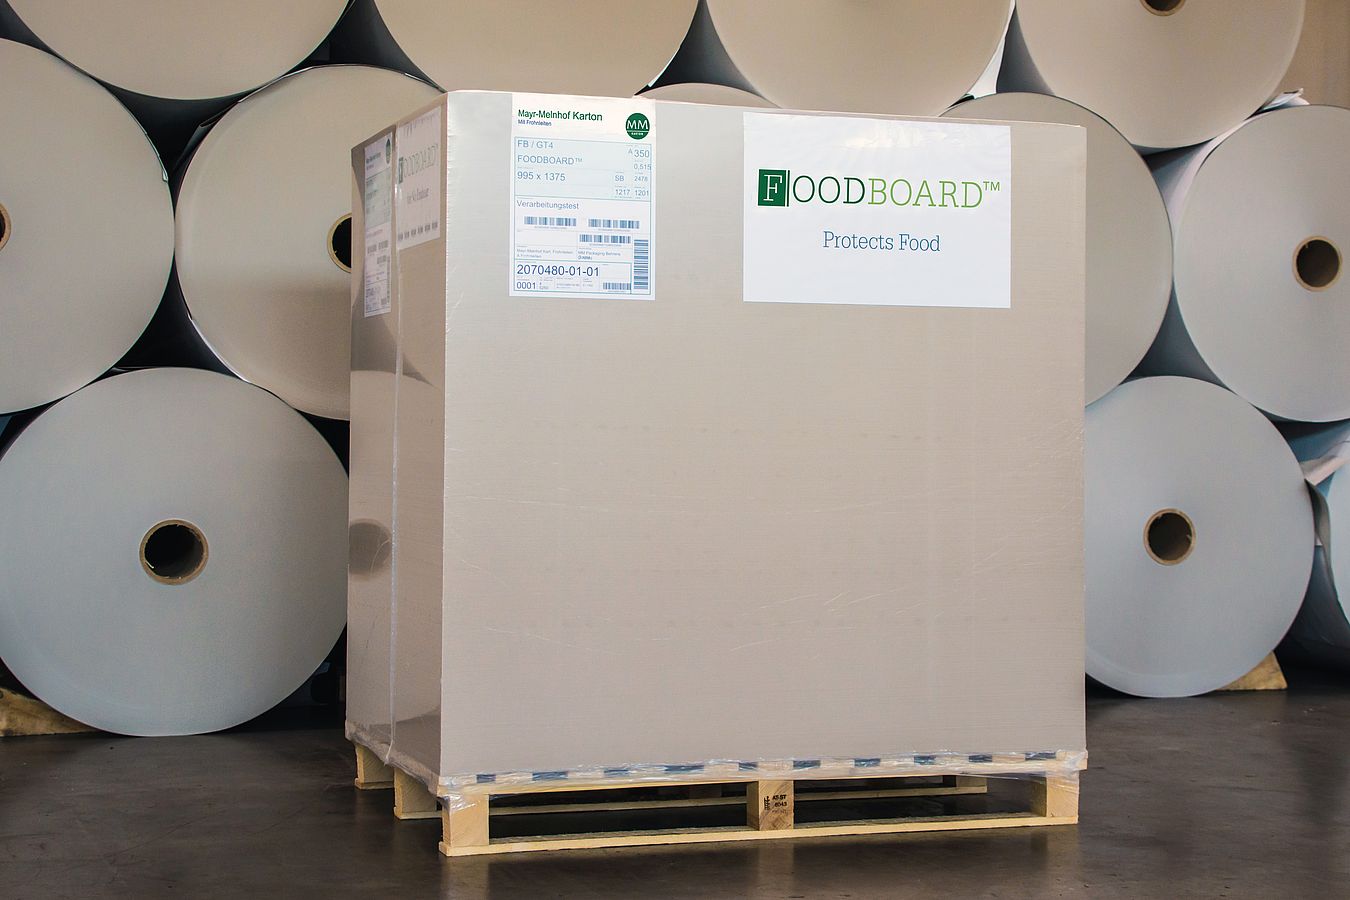 FOODBOARD ™ pallet ready for shipment 